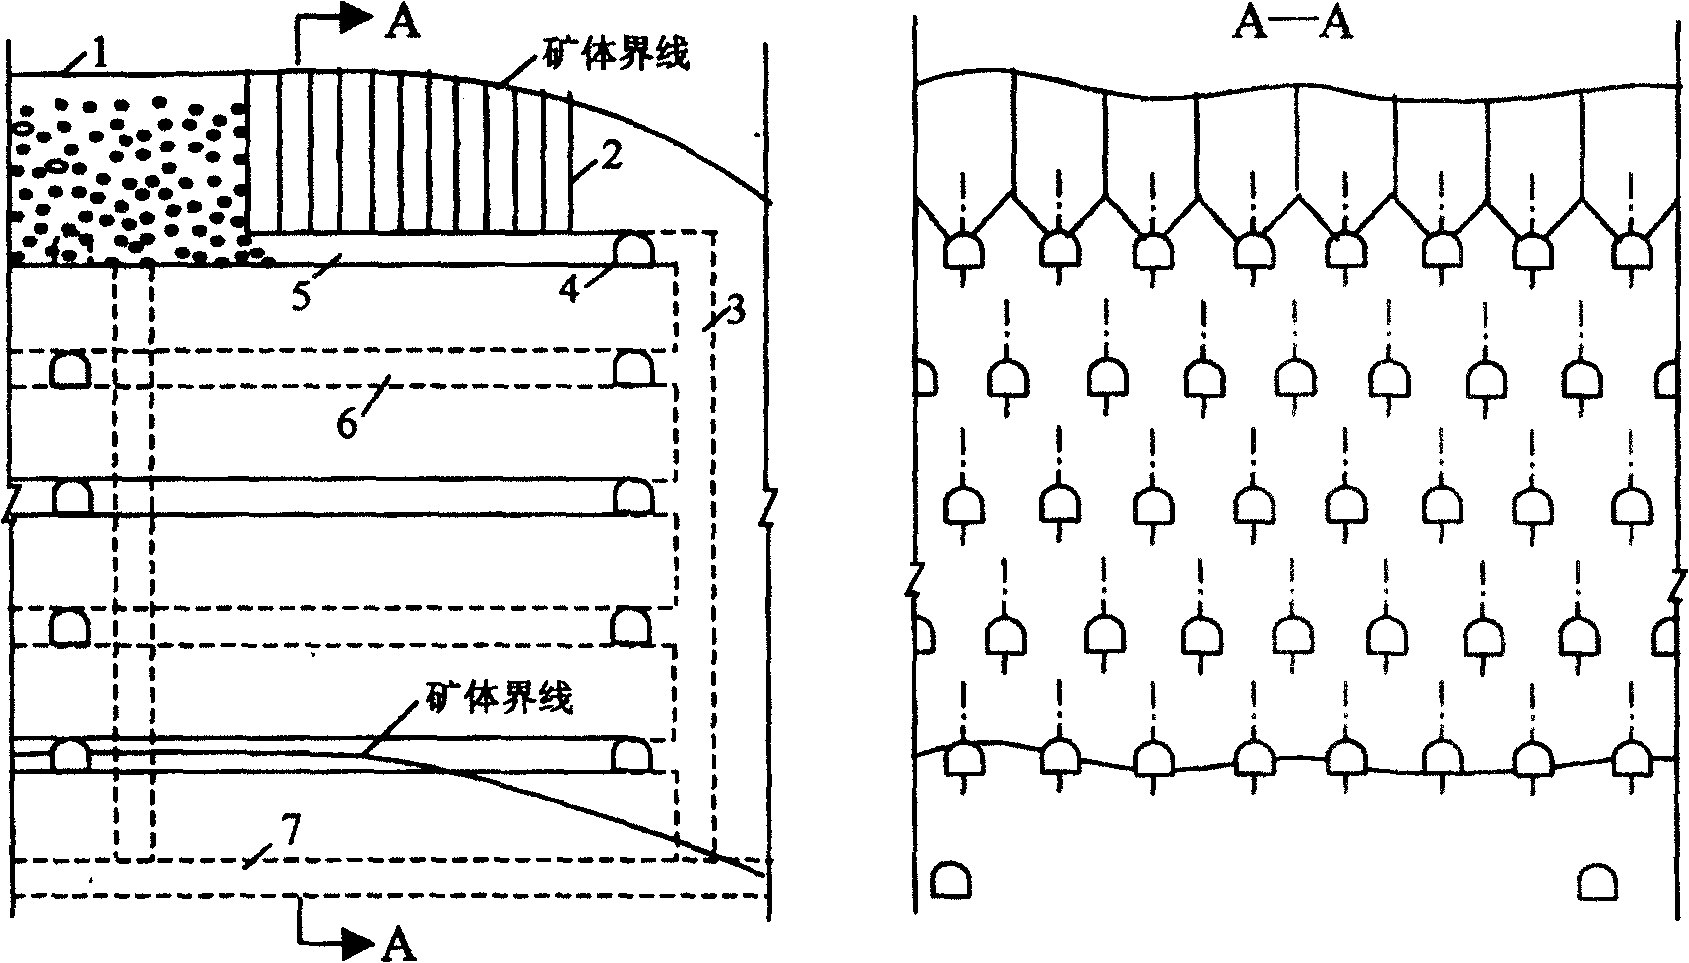 Improved sublevel caving method without bottom column